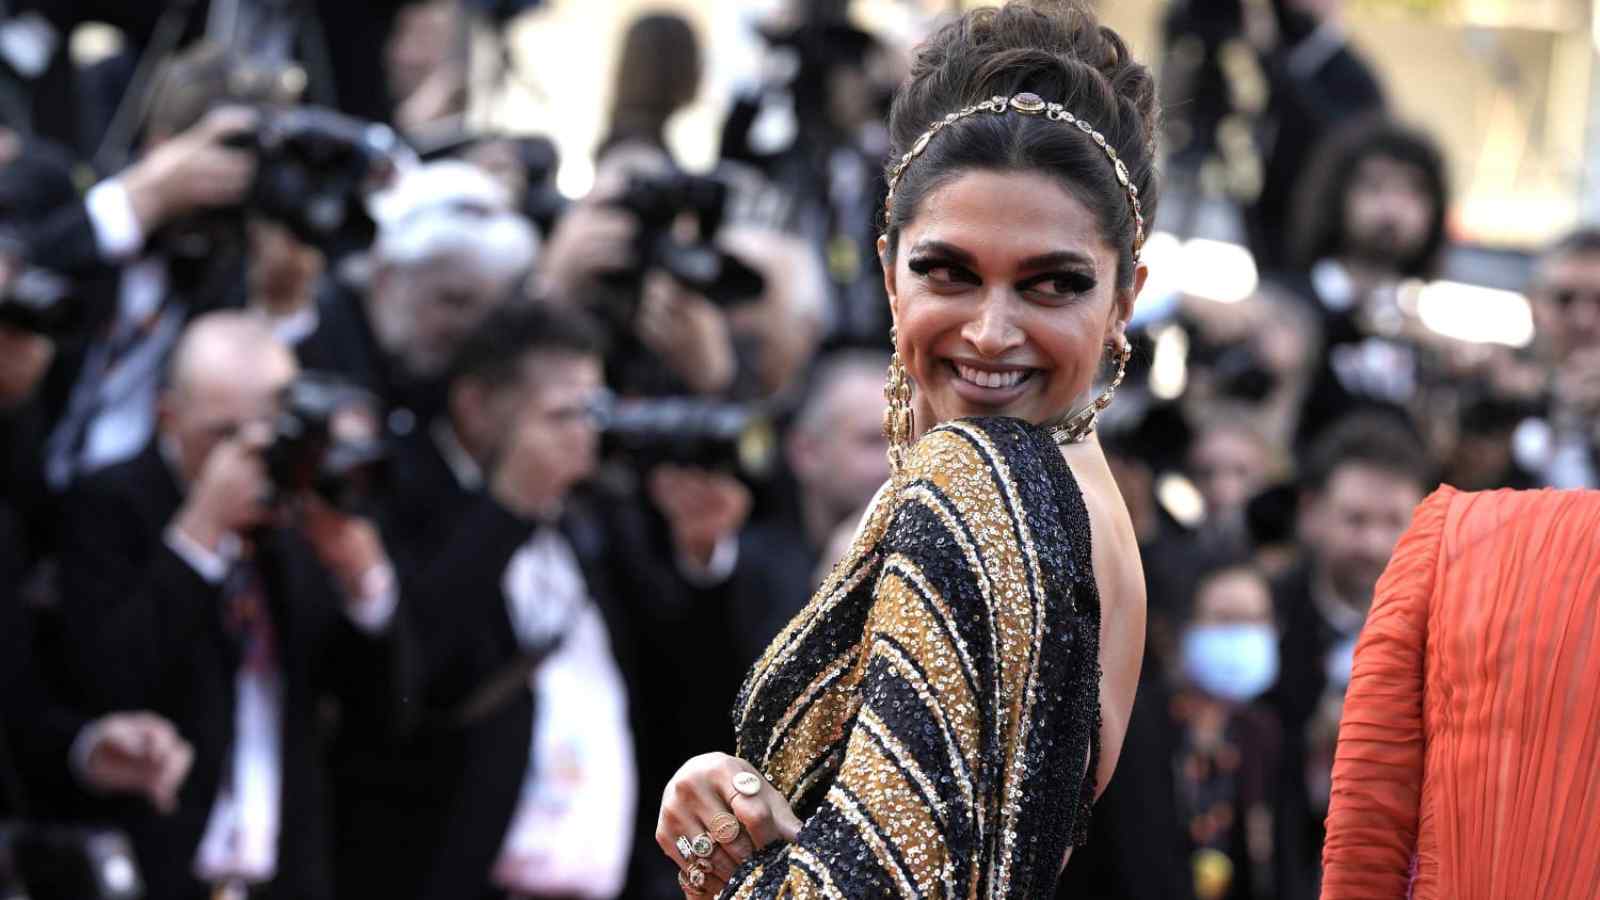 Indian Actress Deepika Padukone on the Cannes 2022 red carpet